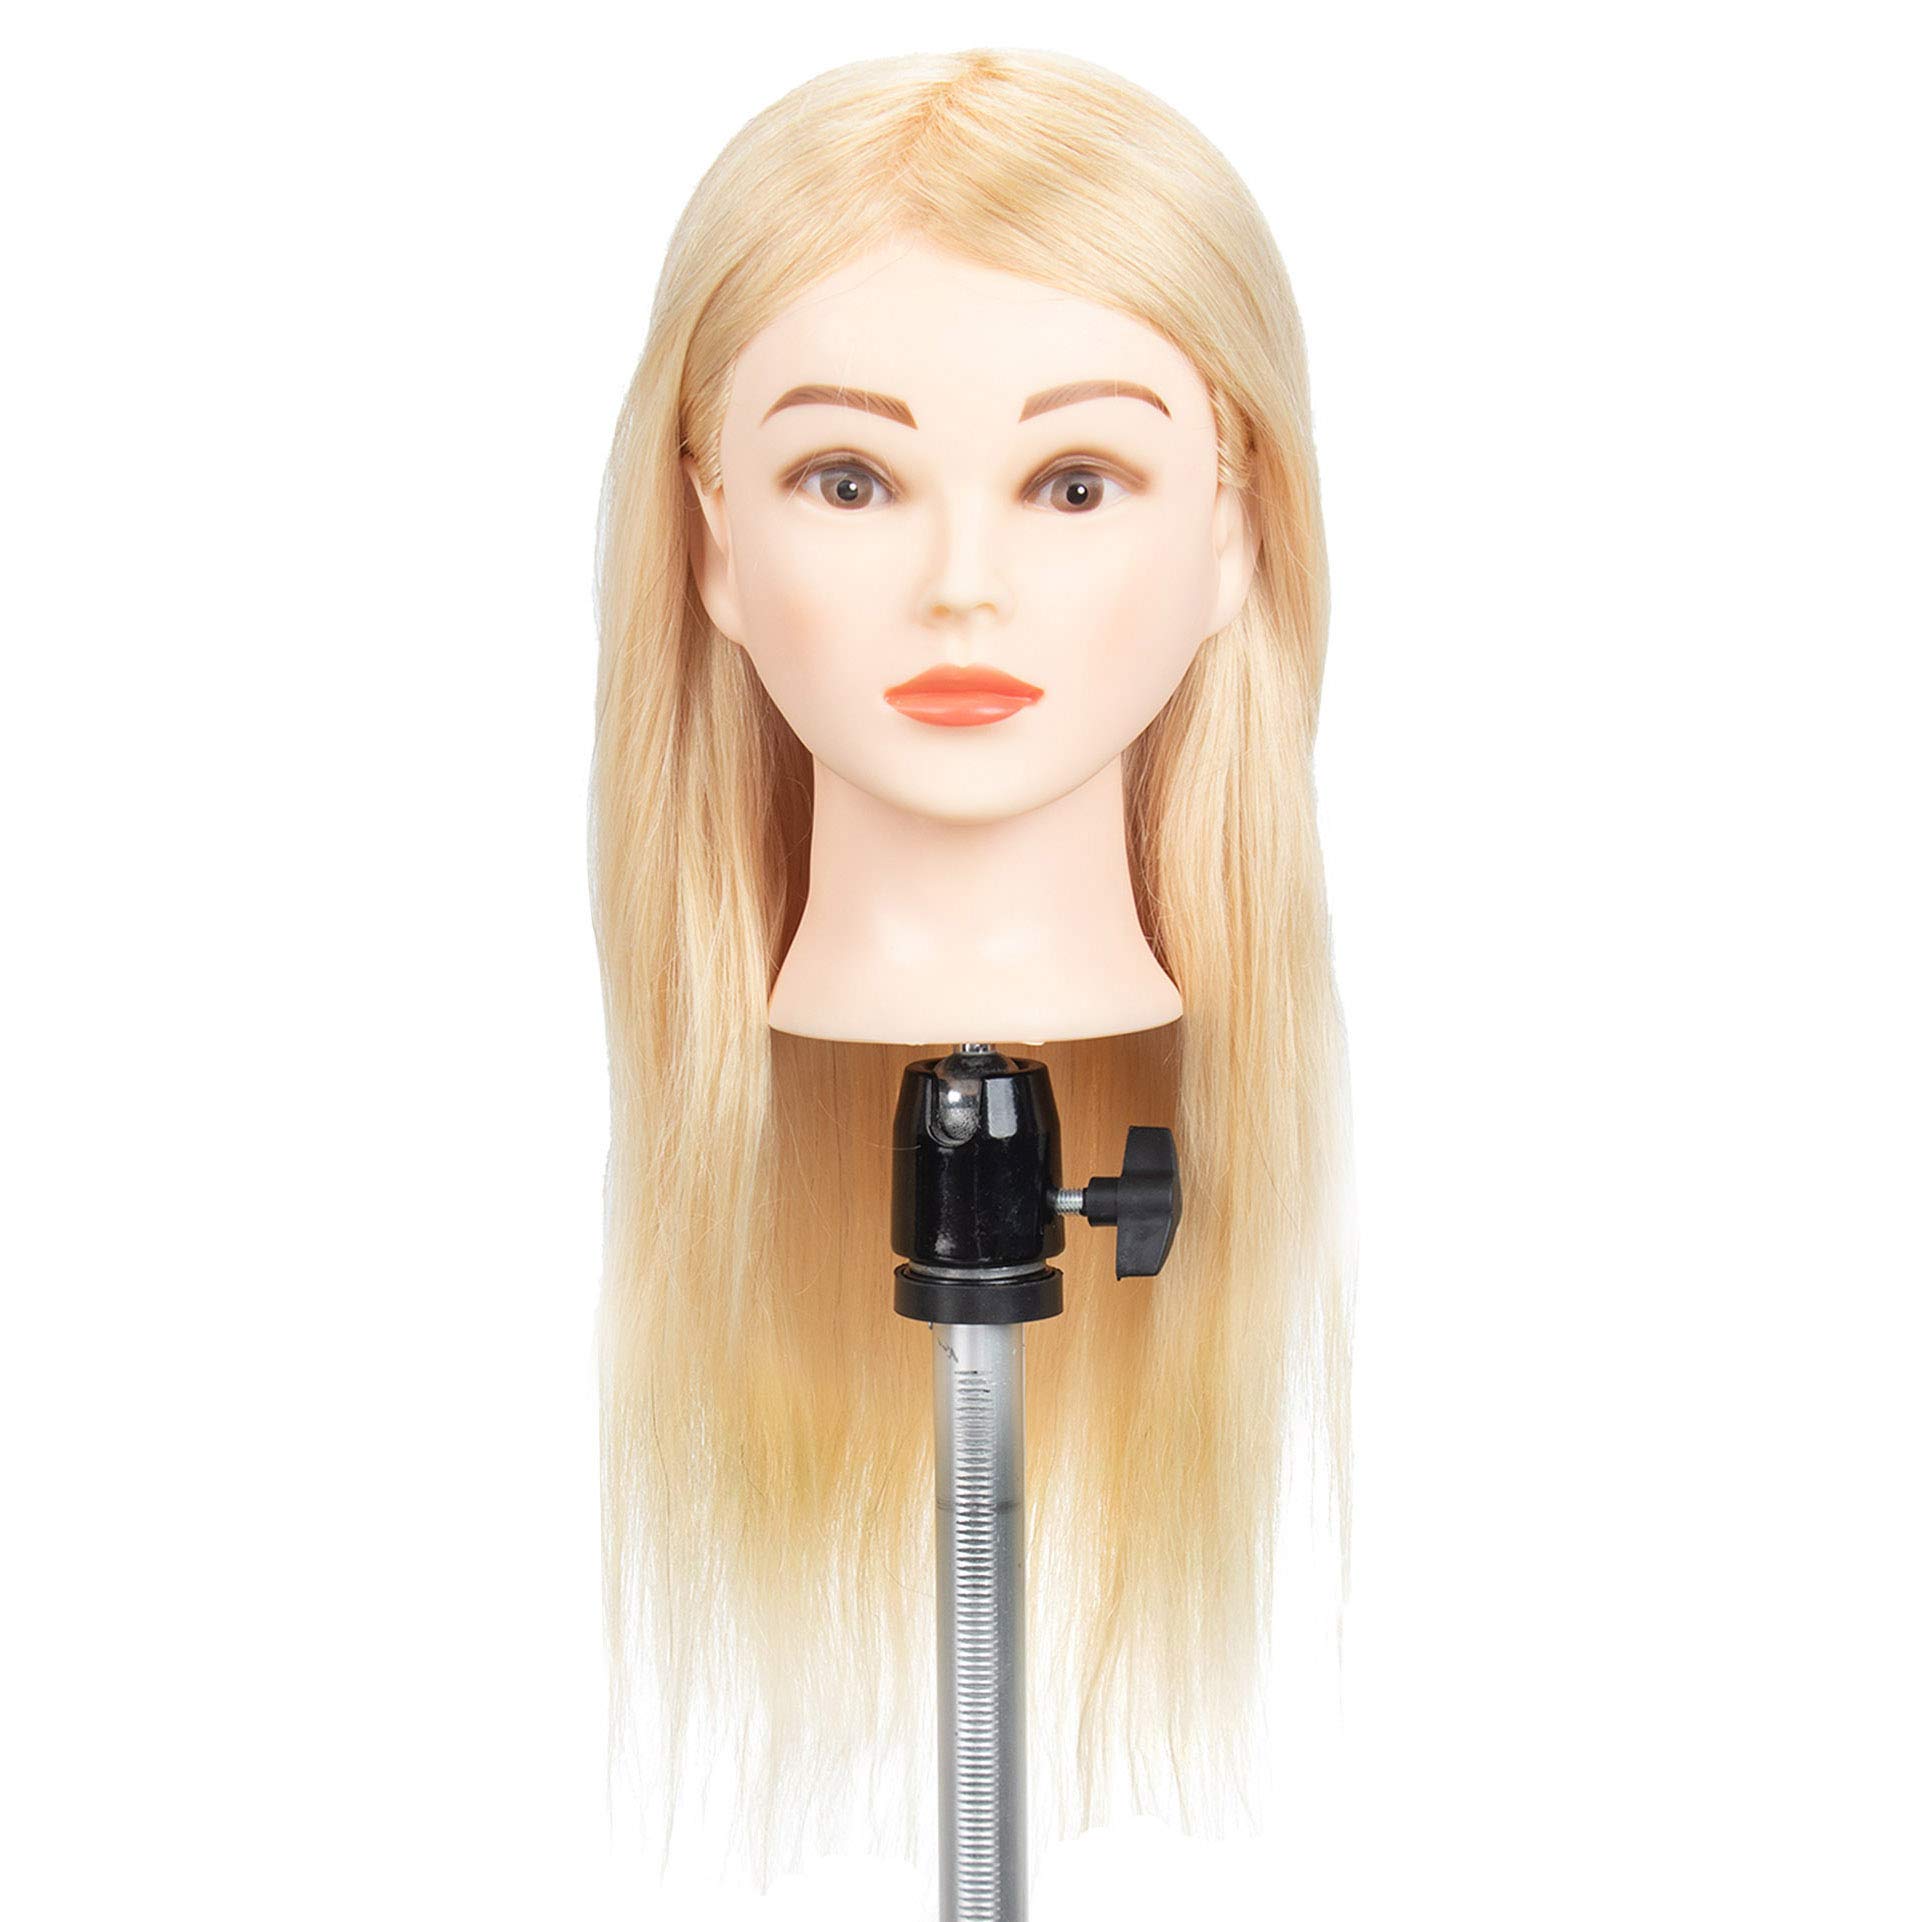 gexworldwide GEX 100% Blonde Human Hair Training Practice Head Styling Dye Cutting Mannequin Manikin Head Without Wig Clamp 613# (18")